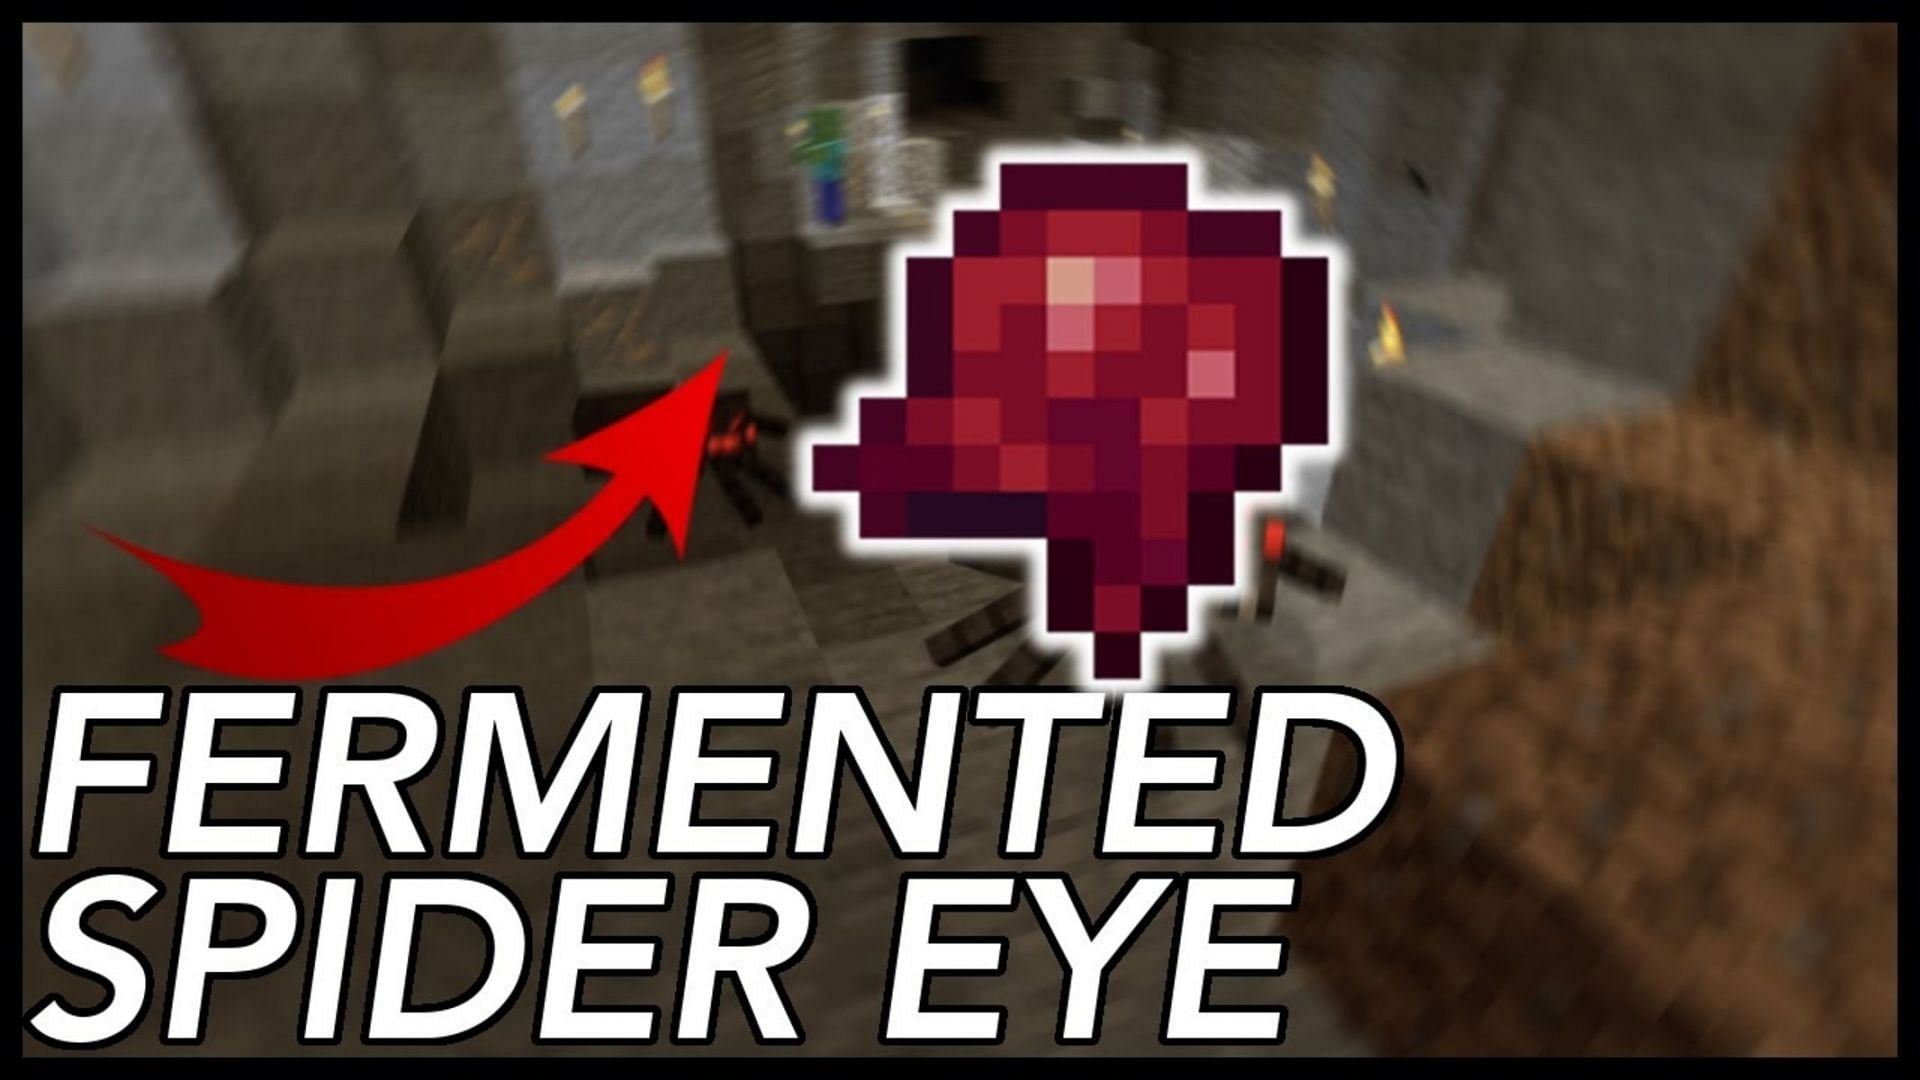 Fermented spider eyes are a central brewing material for offense-oriented potions (Image via Mojang)